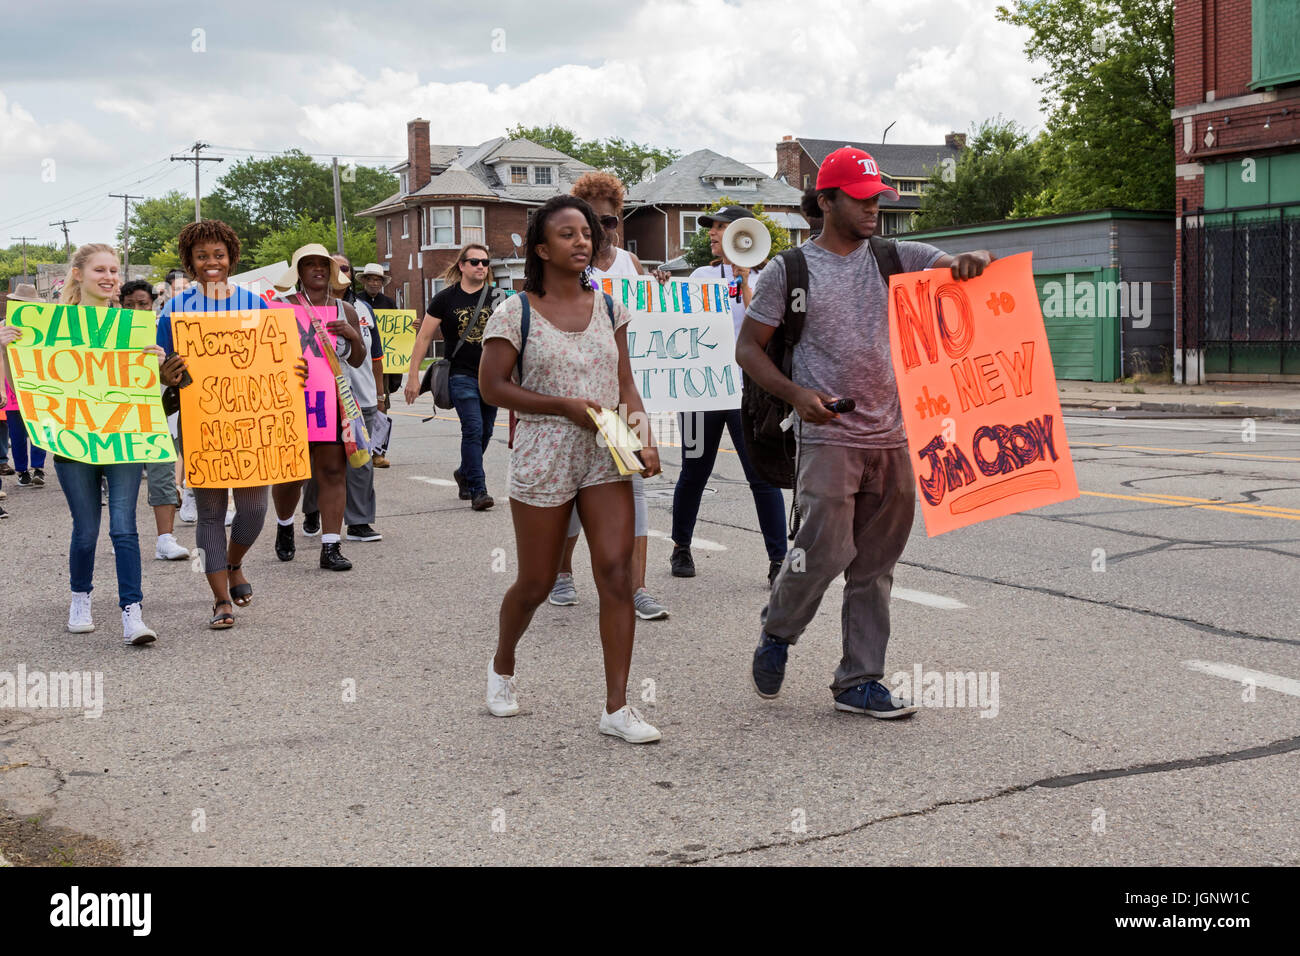 Detroit, Michigan, USA. 8th July, 2017. Detroit residents march through the Islandview neighborhood to protest lack of support for the city's neighborhoods. They say investment has been concentrated downtown, while neighborhood schools, libraries, and recreation centers have been closed and low-income residents displaced by mortgage and tax foreclosures. They say long-time residents are now threatened by gentrification of parts of their community. Credit: Jim West/Alamy Live News Stock Photo